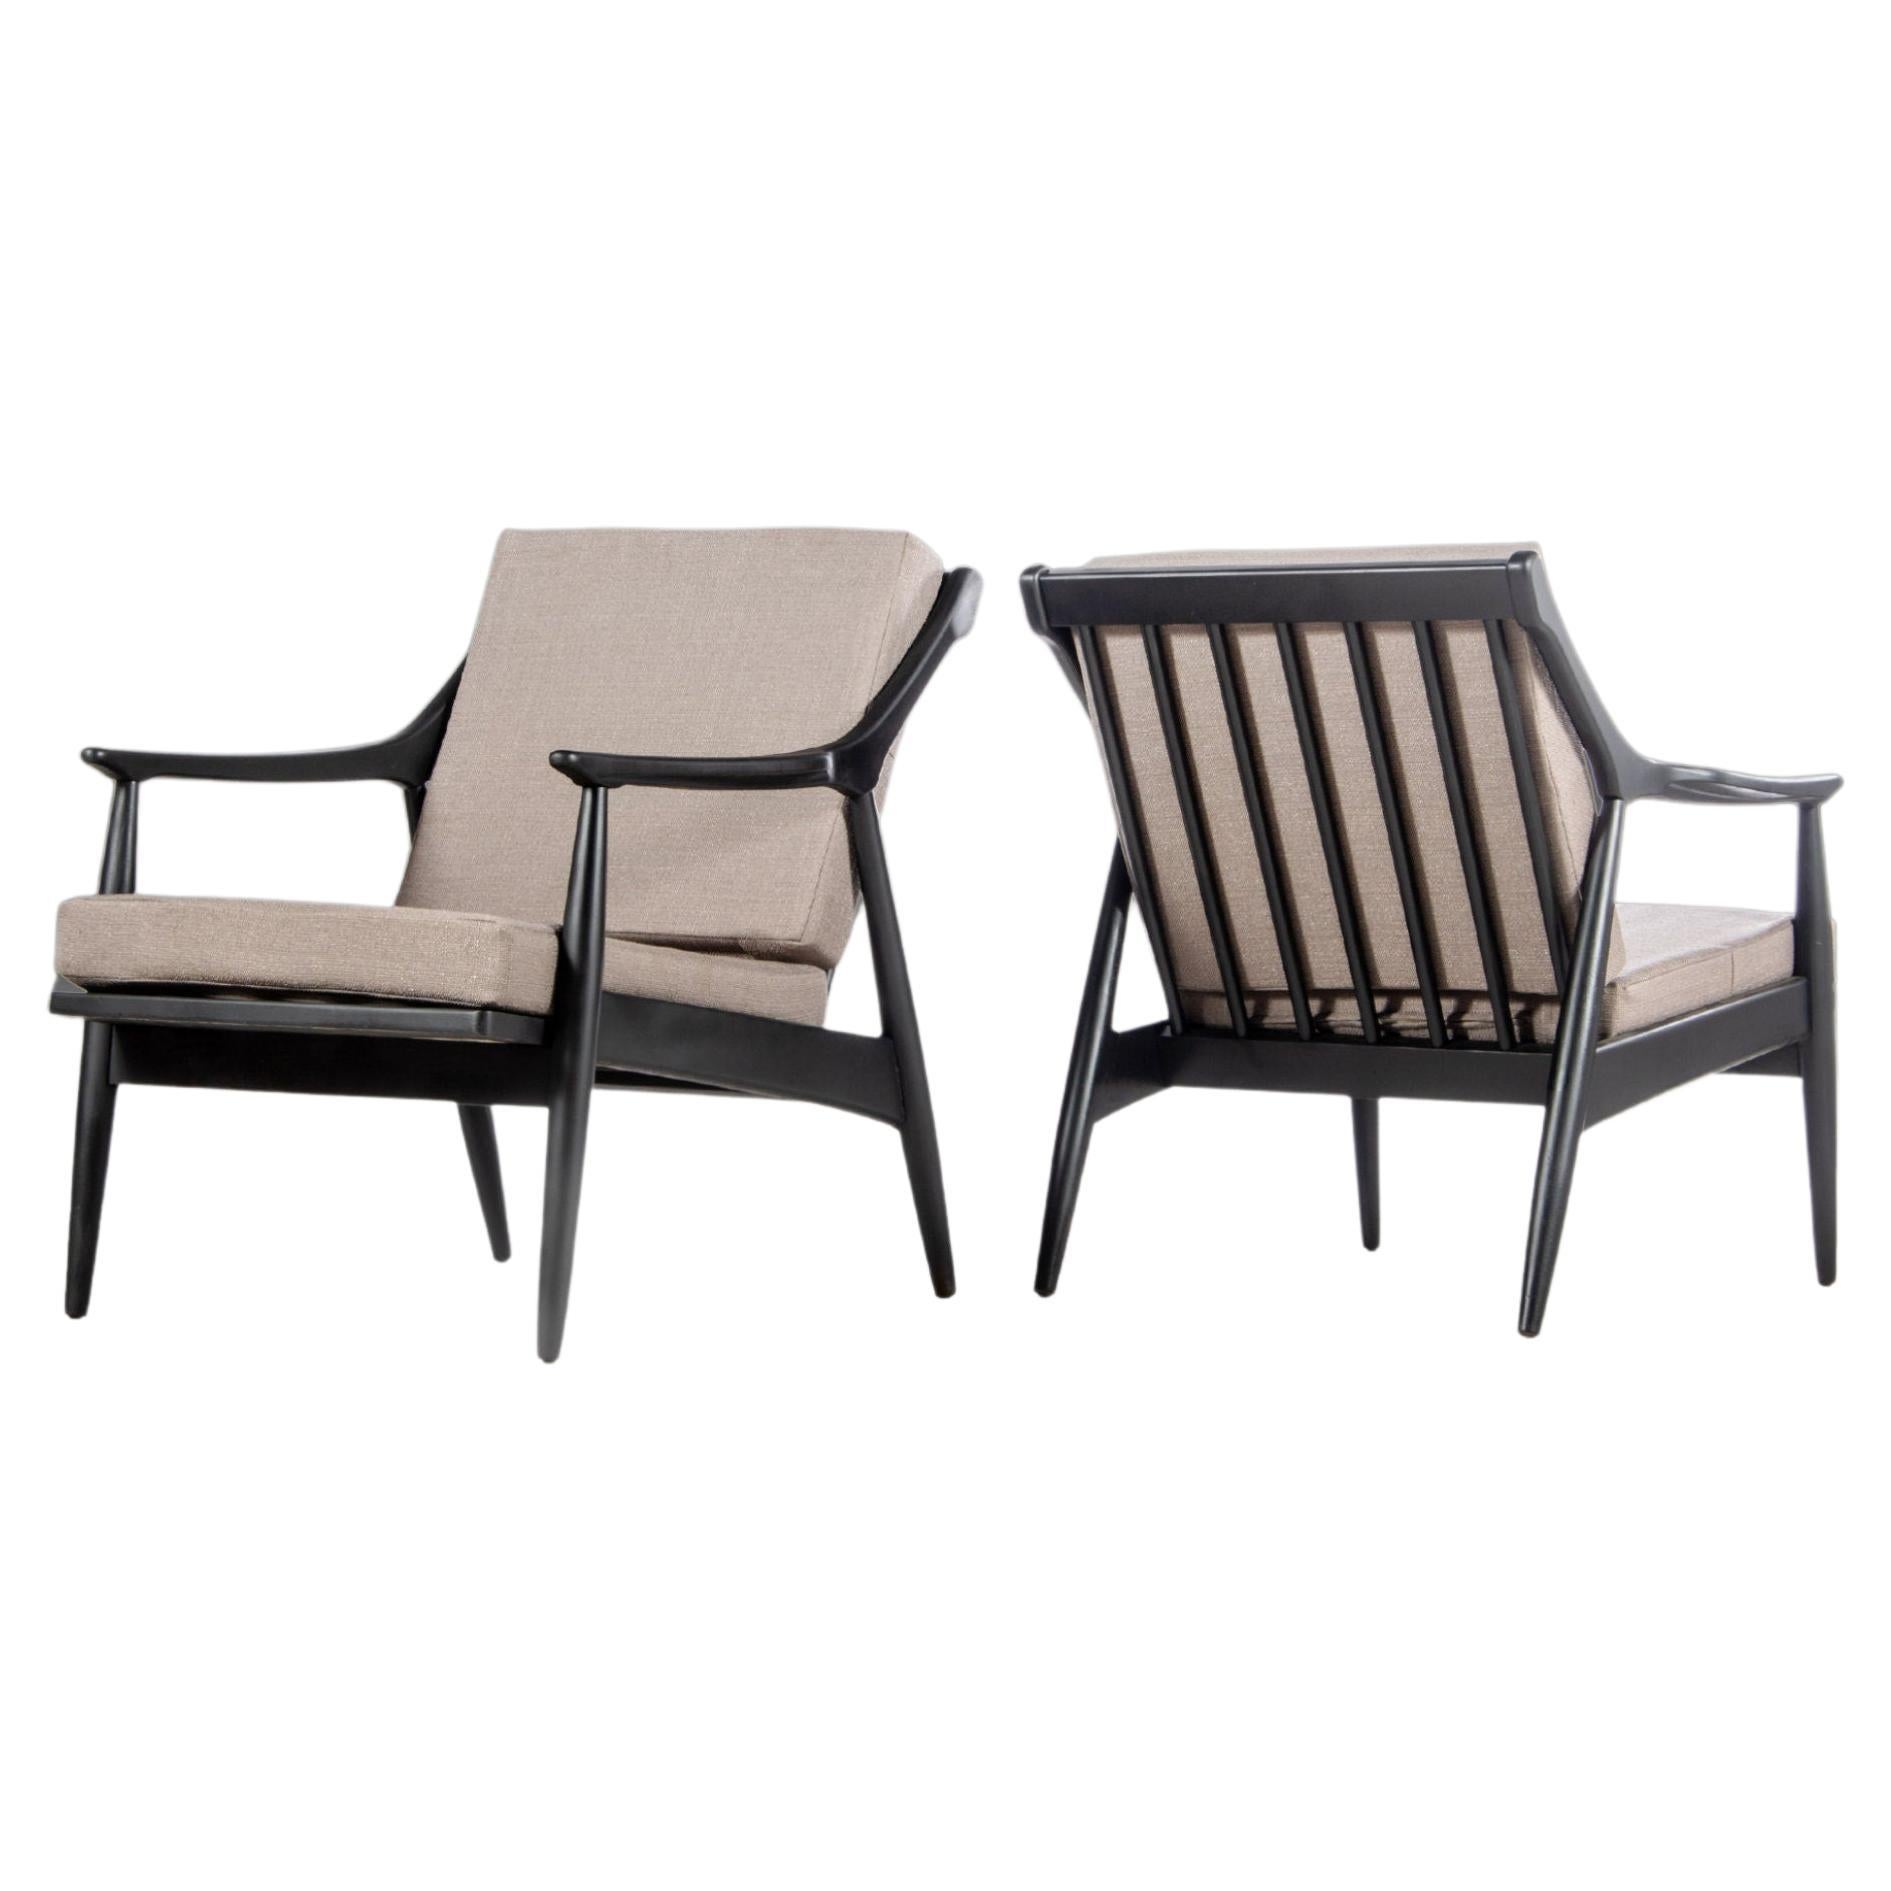 Set of Two '2' Ebony Danish Modern Lounge Chairs by Paoli in New Fabric, c 1960s